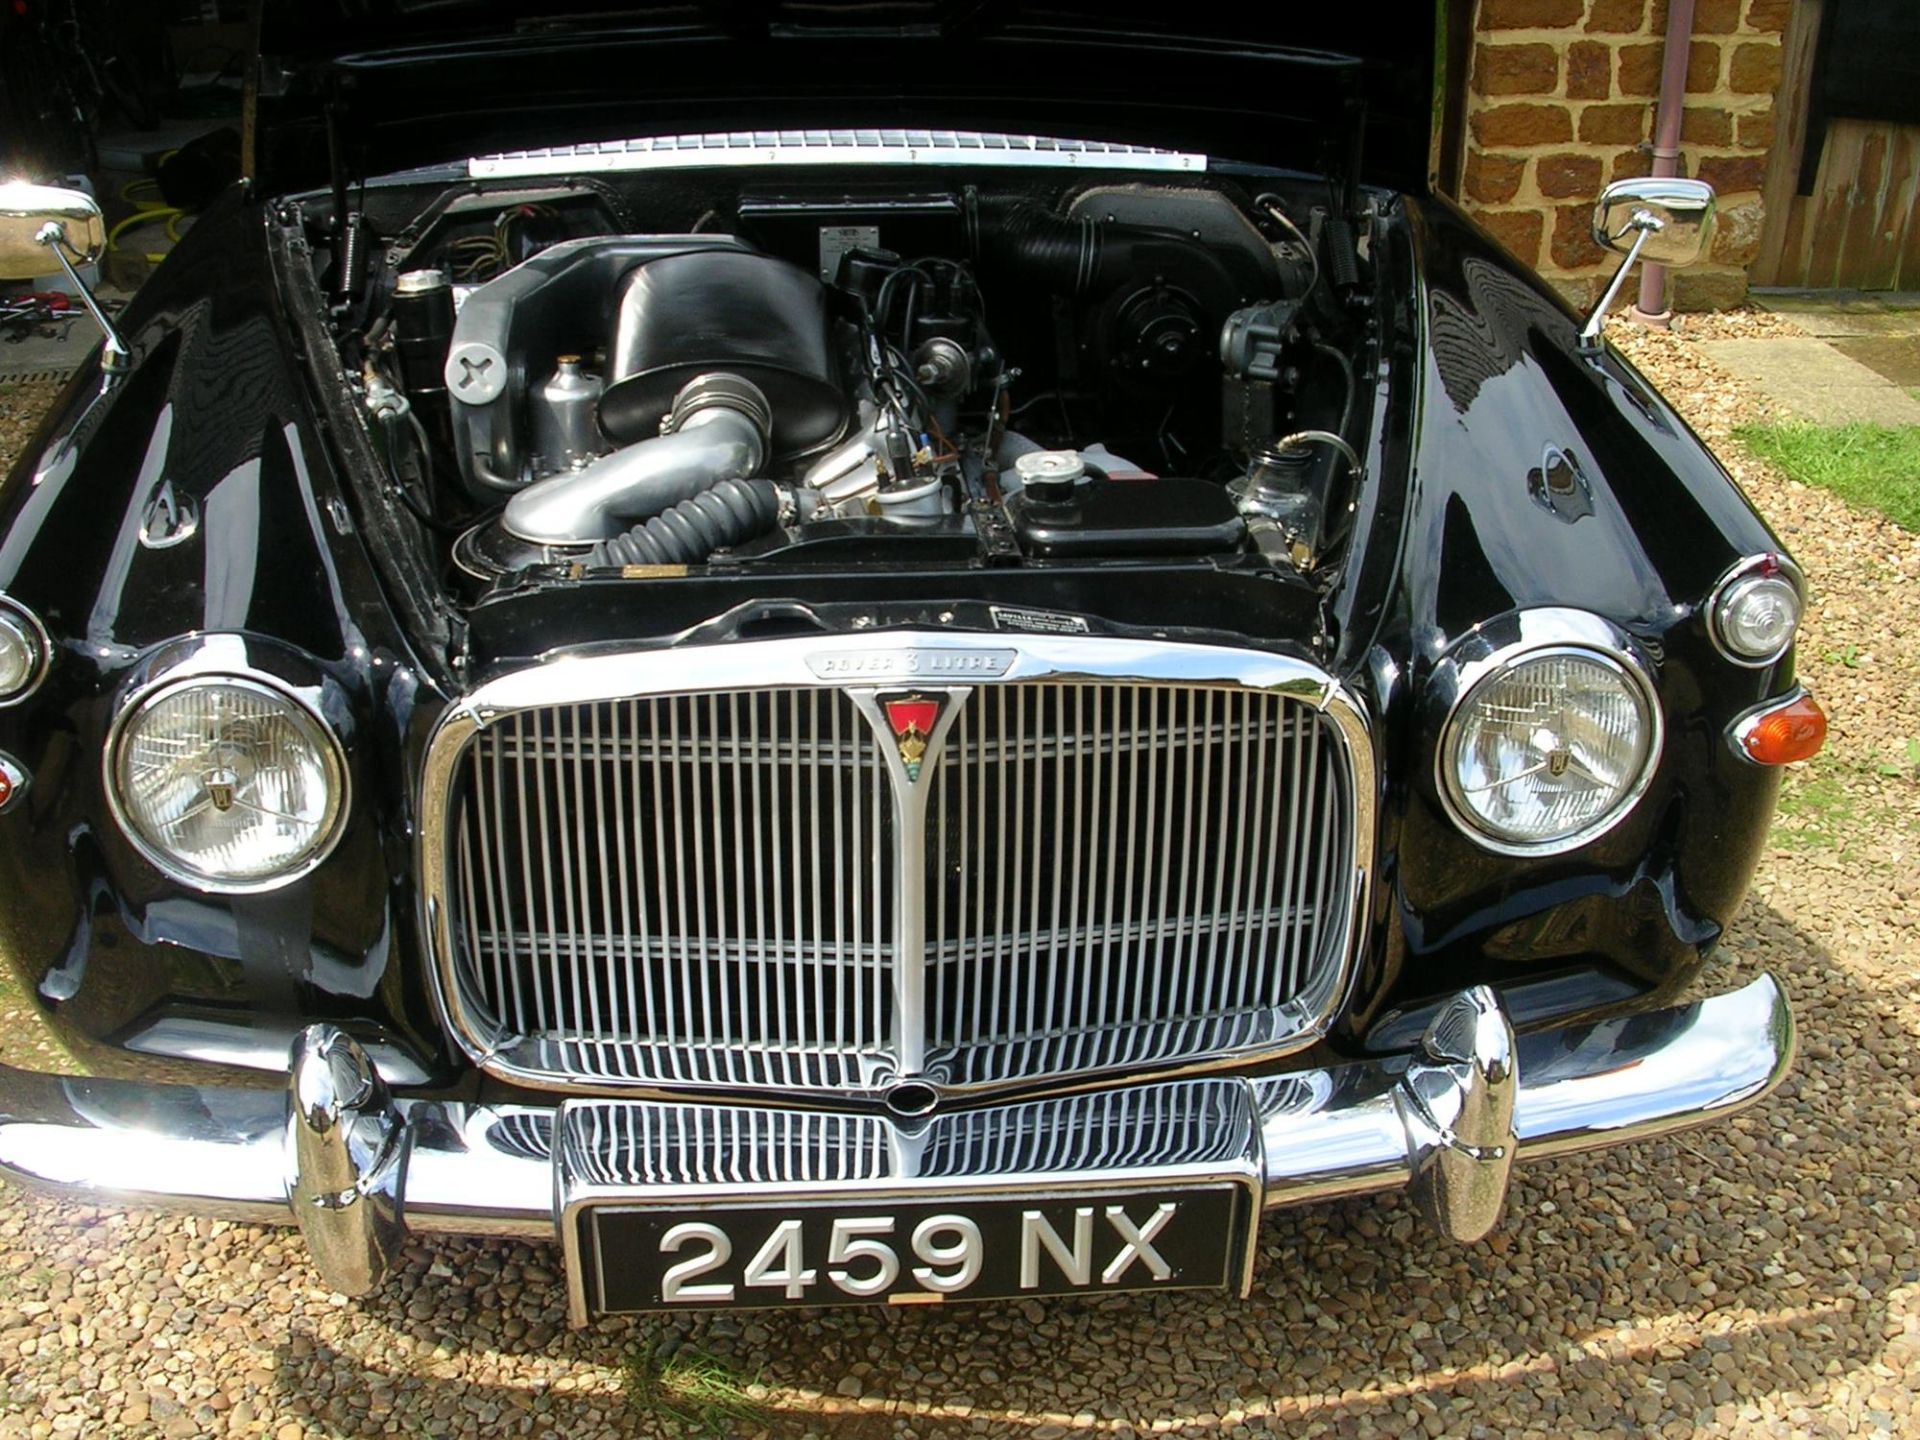 1959 Rover 3-Litre Saloon Mk1 (P5) - Image 3 of 10